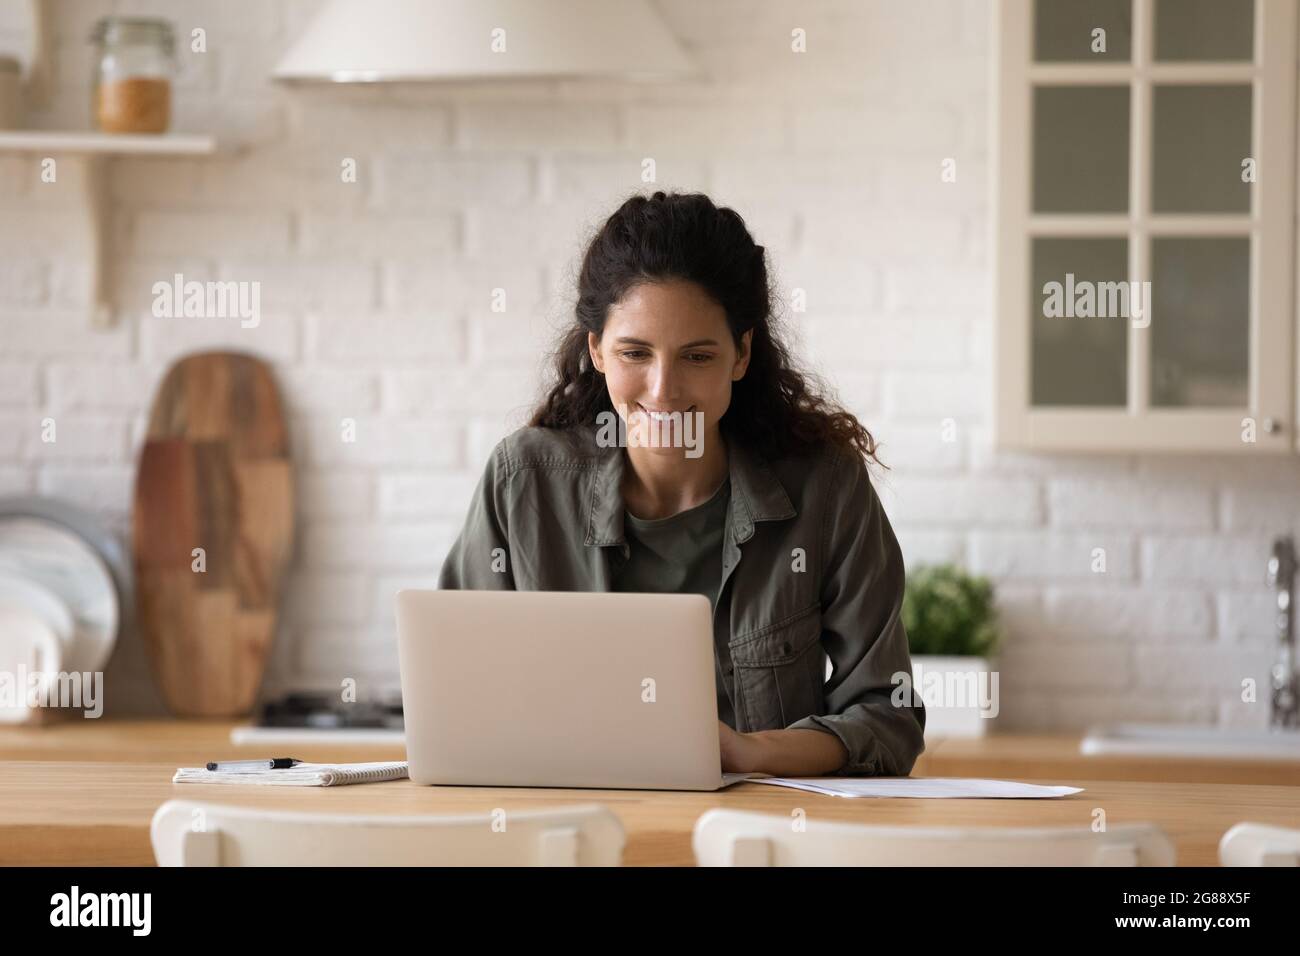 Busy latin lady writing business email on laptop at kitchen Stock Photo